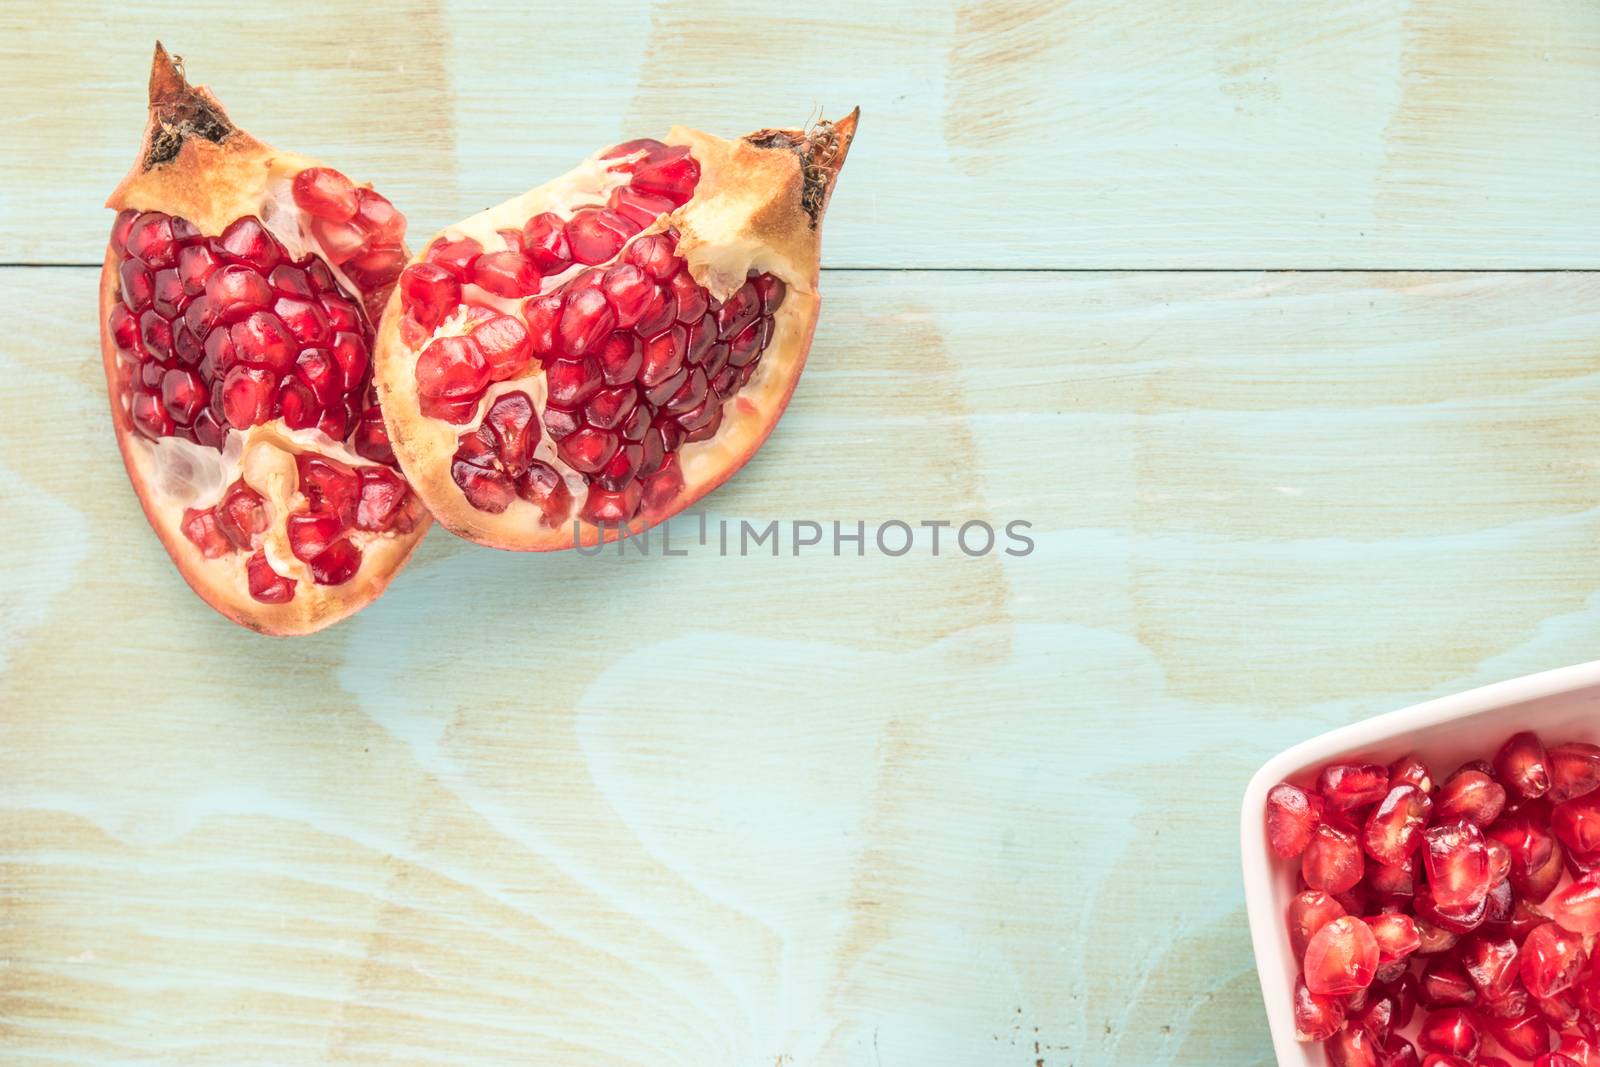 Pomegranates over grunge wooden background by AnaMarques